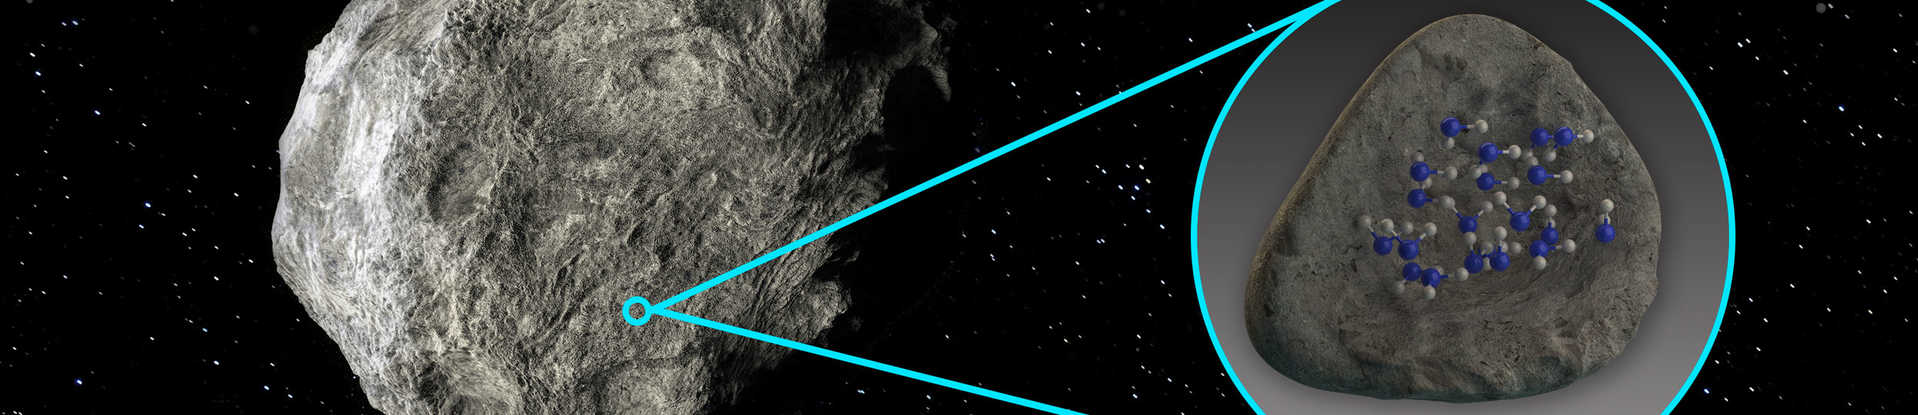 Go to press release: SwRI scientists identify water molecules on asteroids for the first time